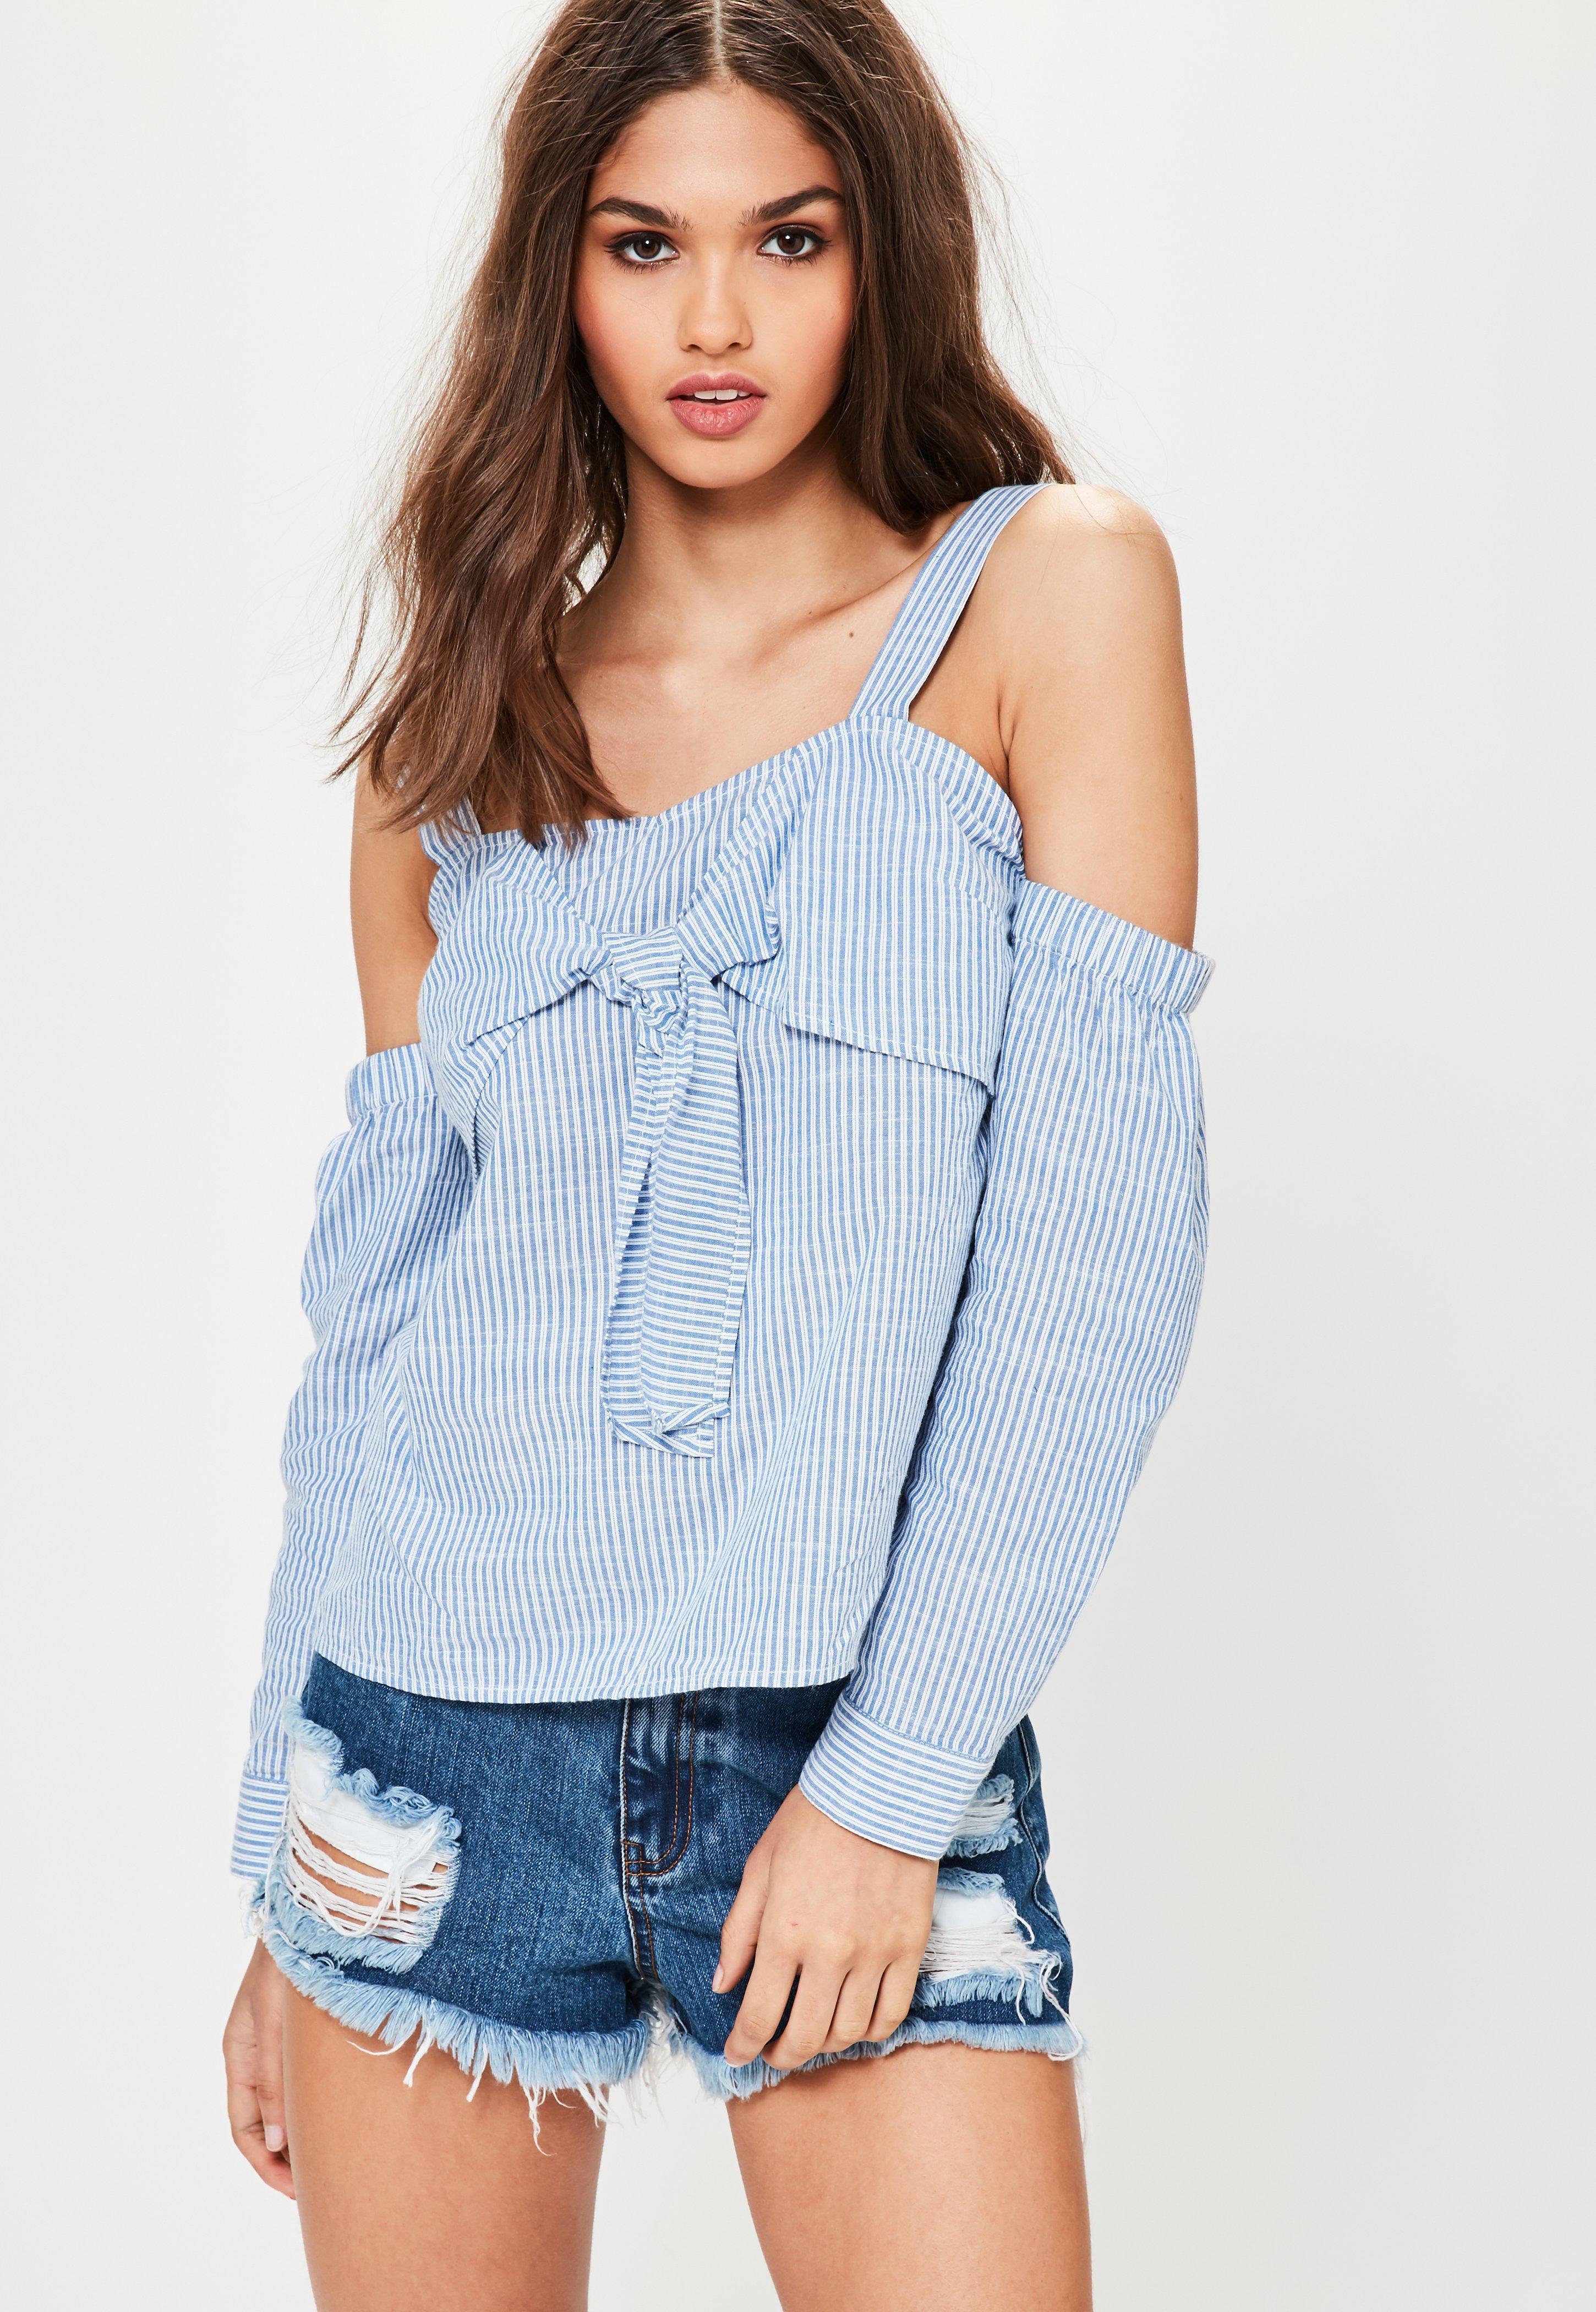 Lyst - Missguided Blue Striped Cold Shoulder Tie Front Blouse in Blue ...